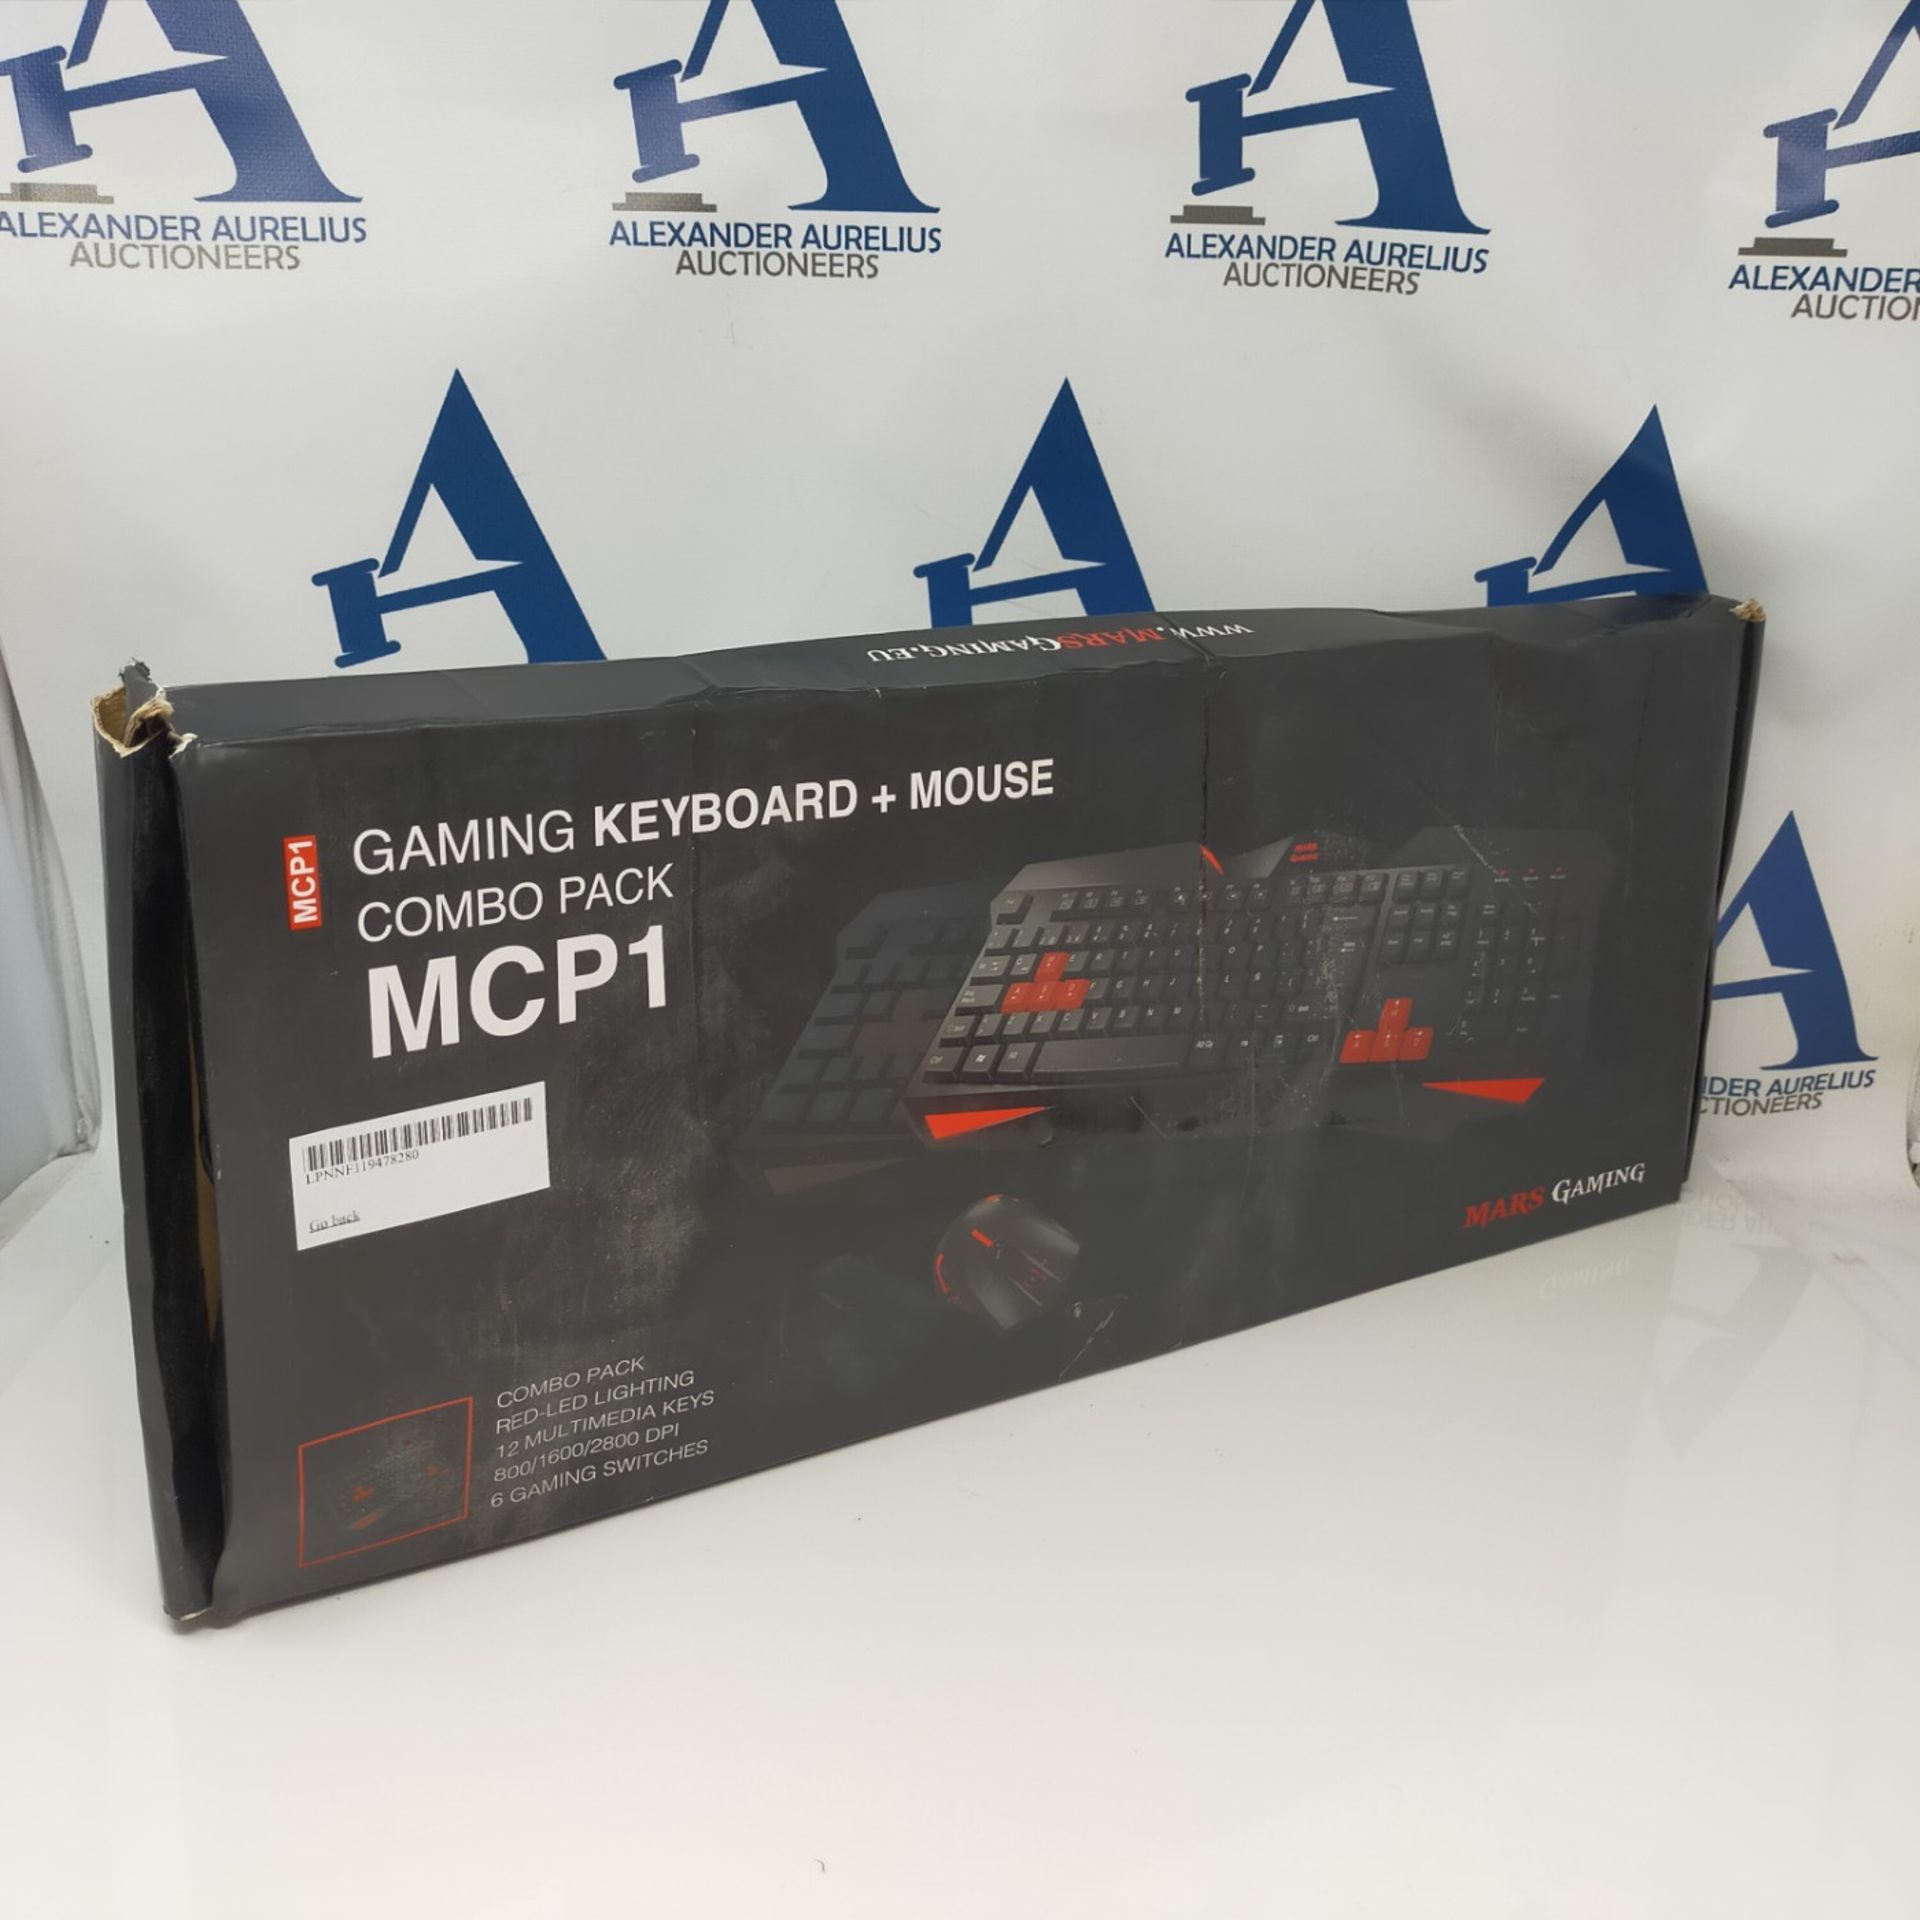 [INCOMPLETE] Mars Gaming MCP1 - Gaming Keyboard and Mouse Pack (2800 DPI, Anti-Ghostin - Image 2 of 3